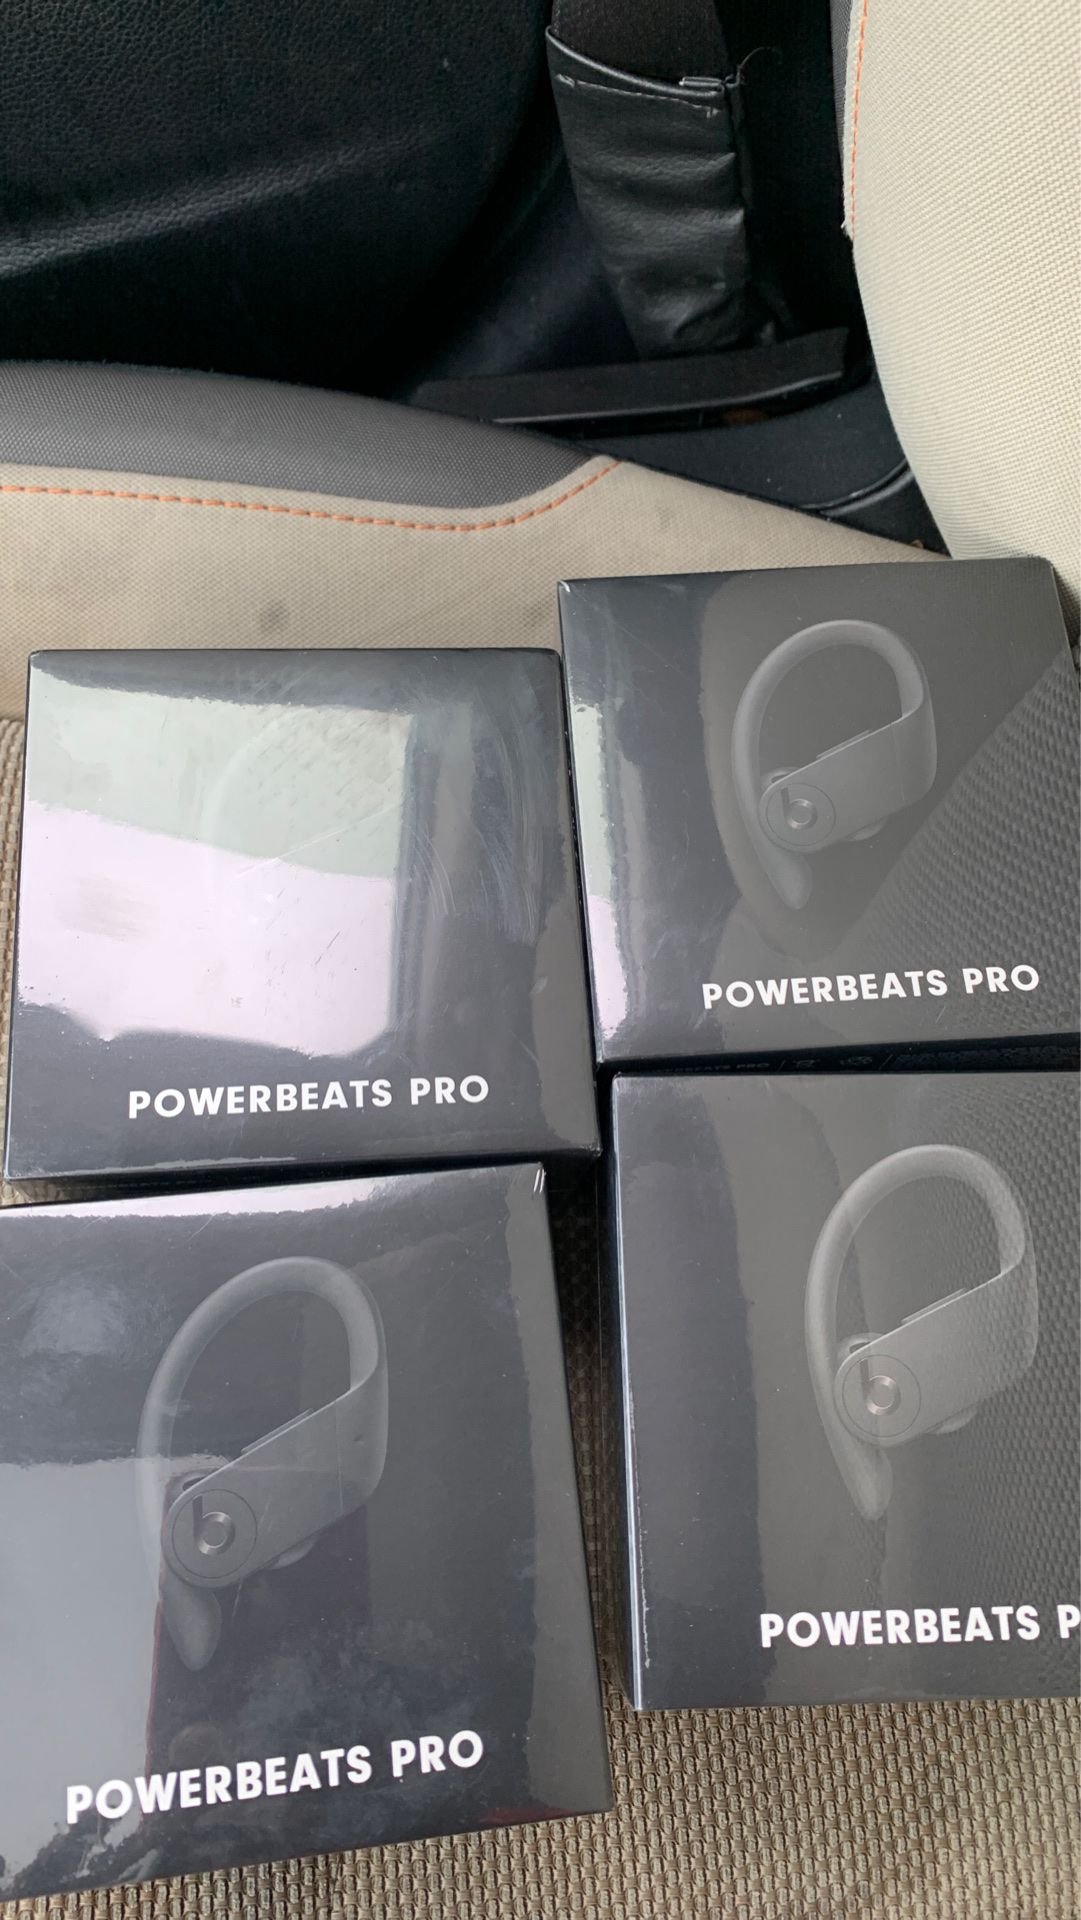 Powerbeats wireless 140$ they 199 online an in stores